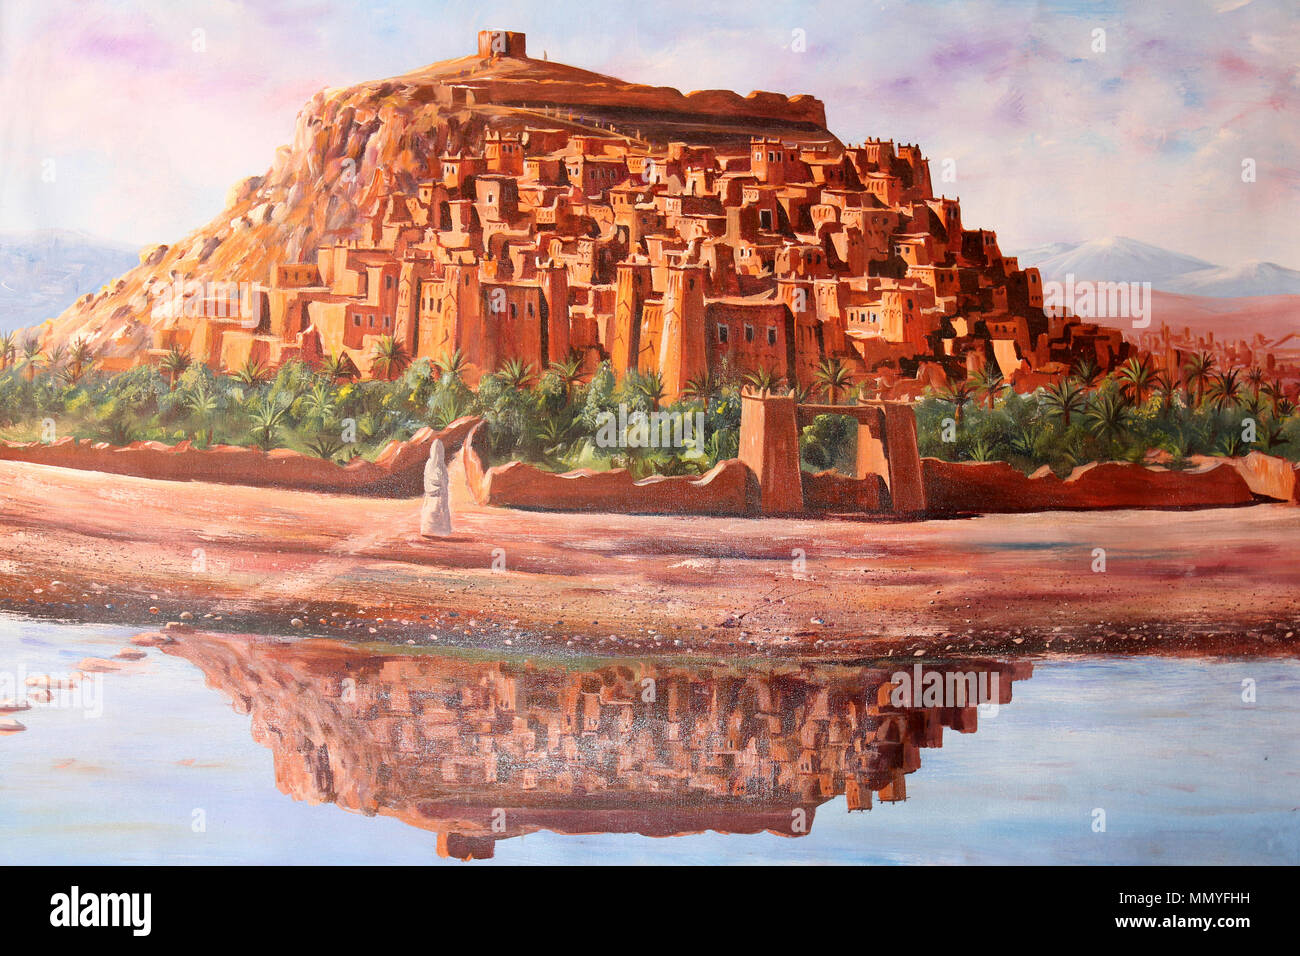 Painting of the Ksar of Ait-Ben-Haddou Stock Photo